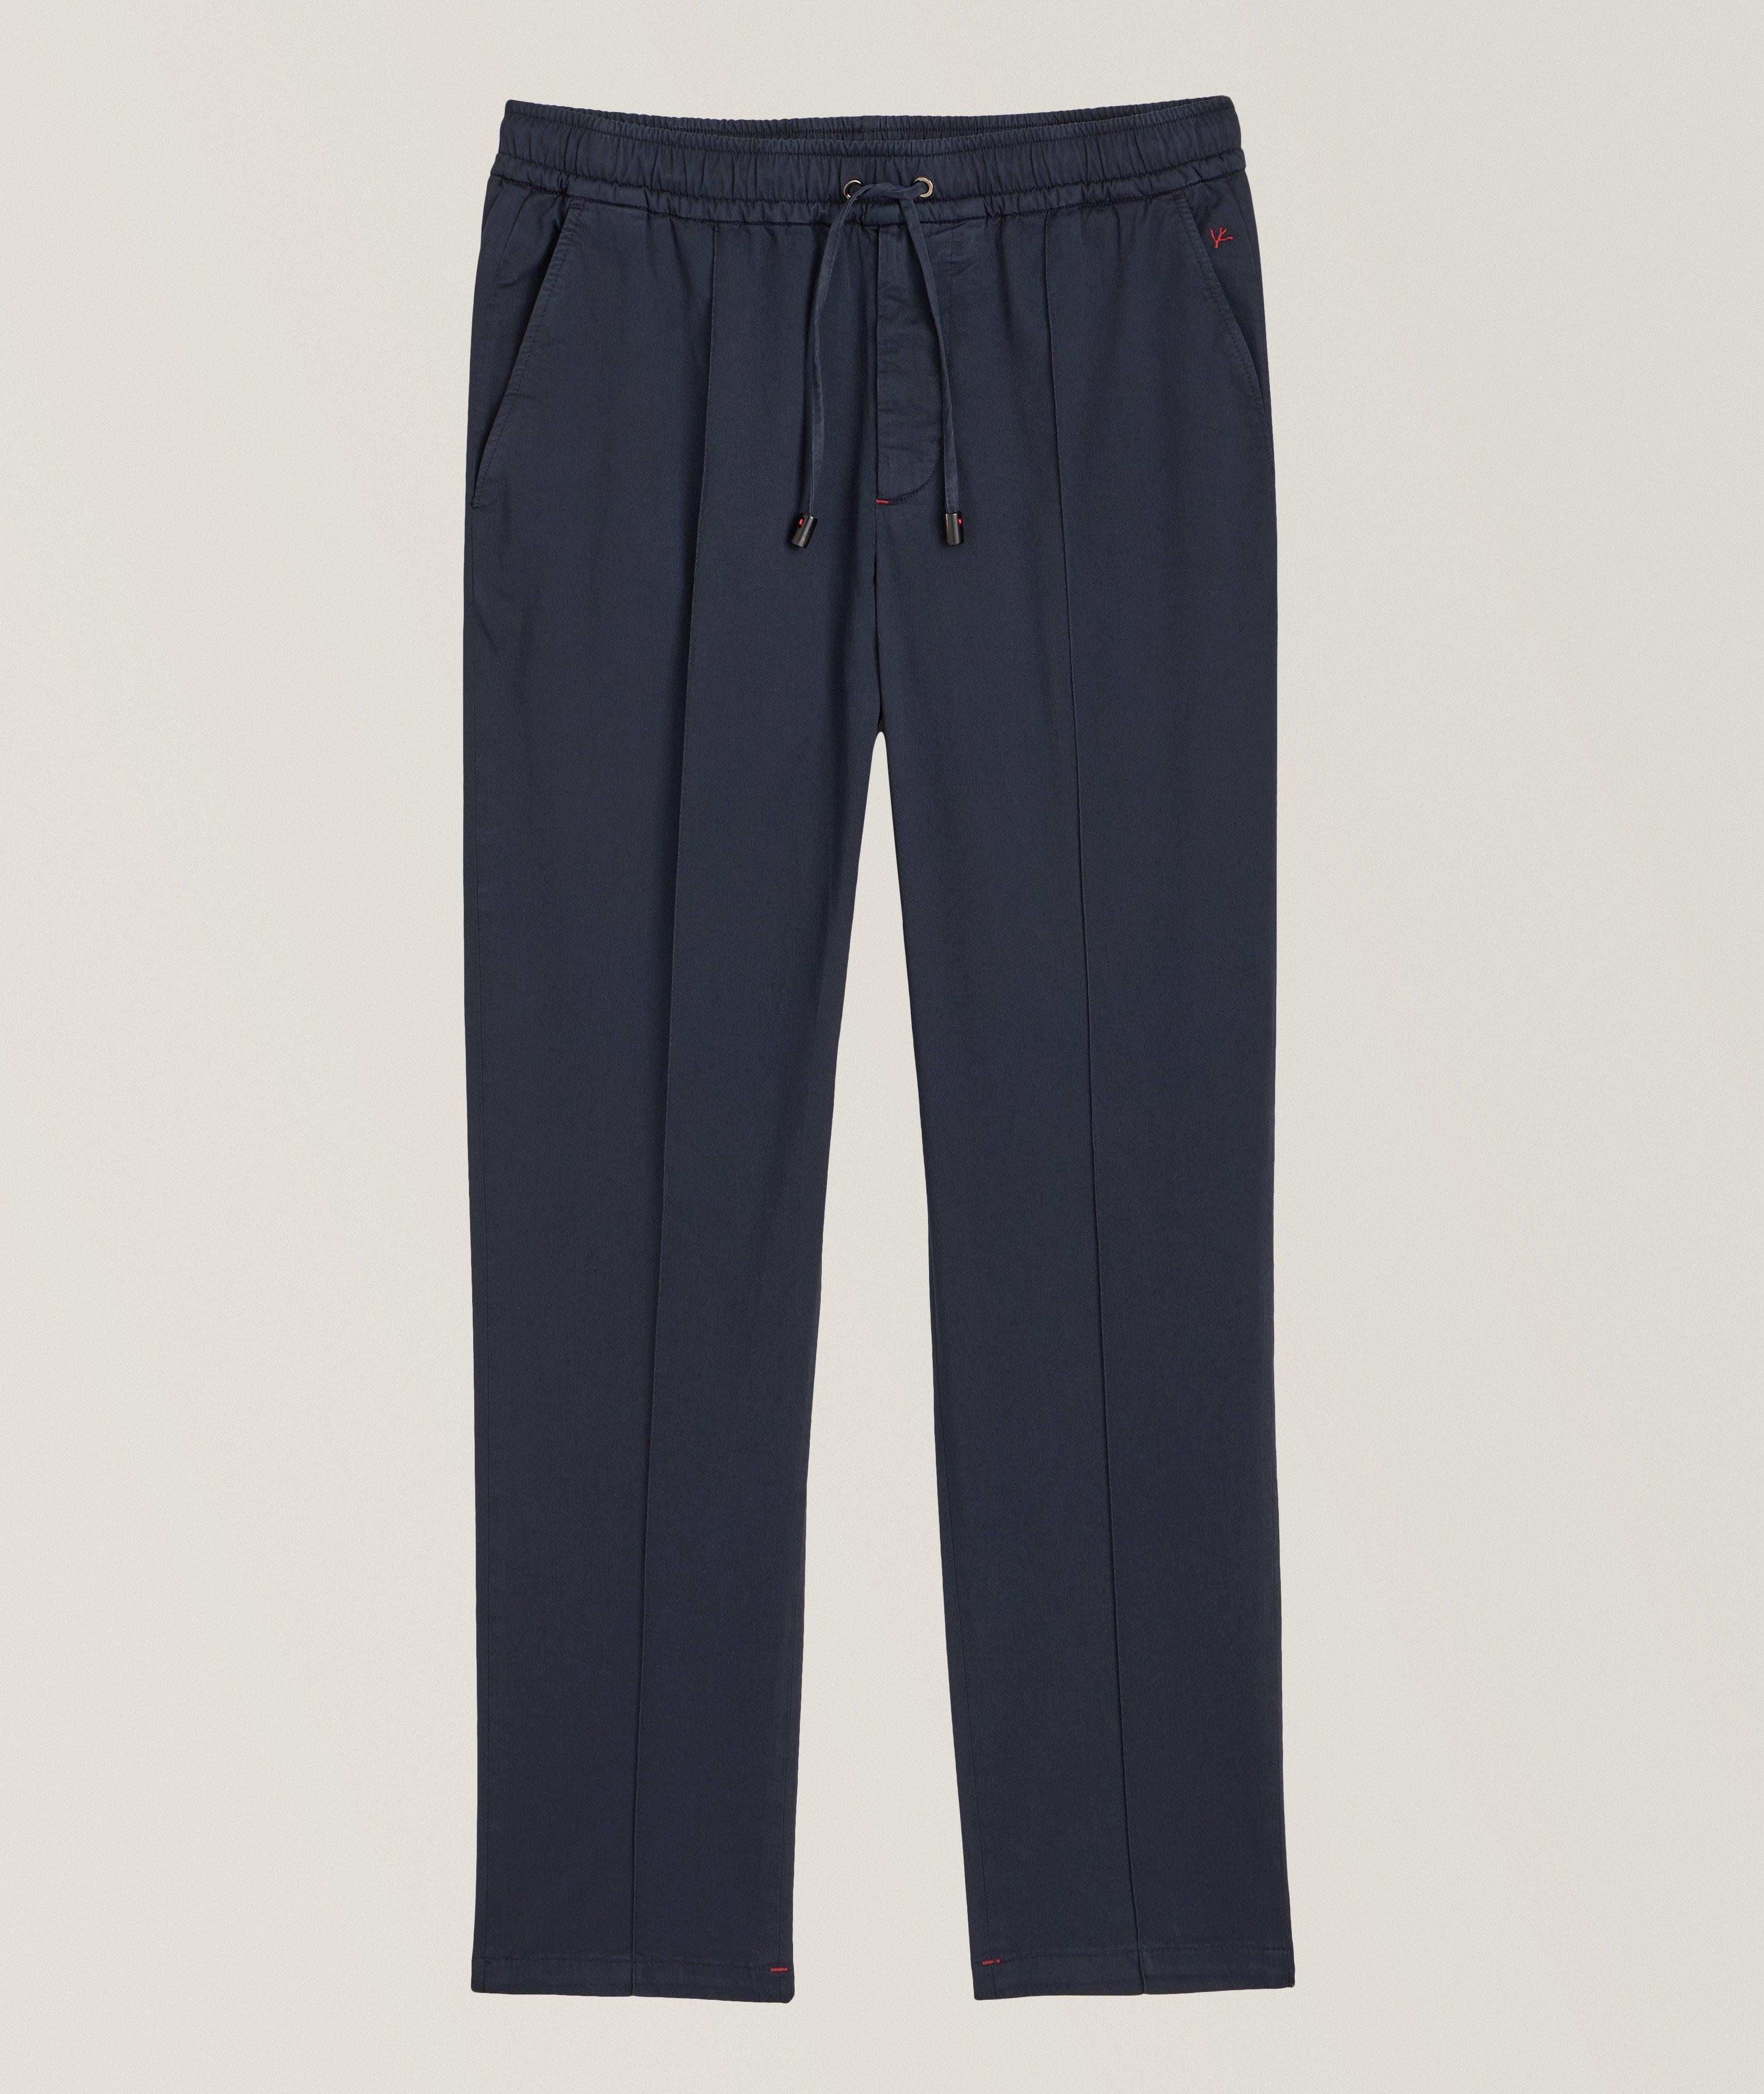 Isaia Stretch-Cotton Drawstring Trousers